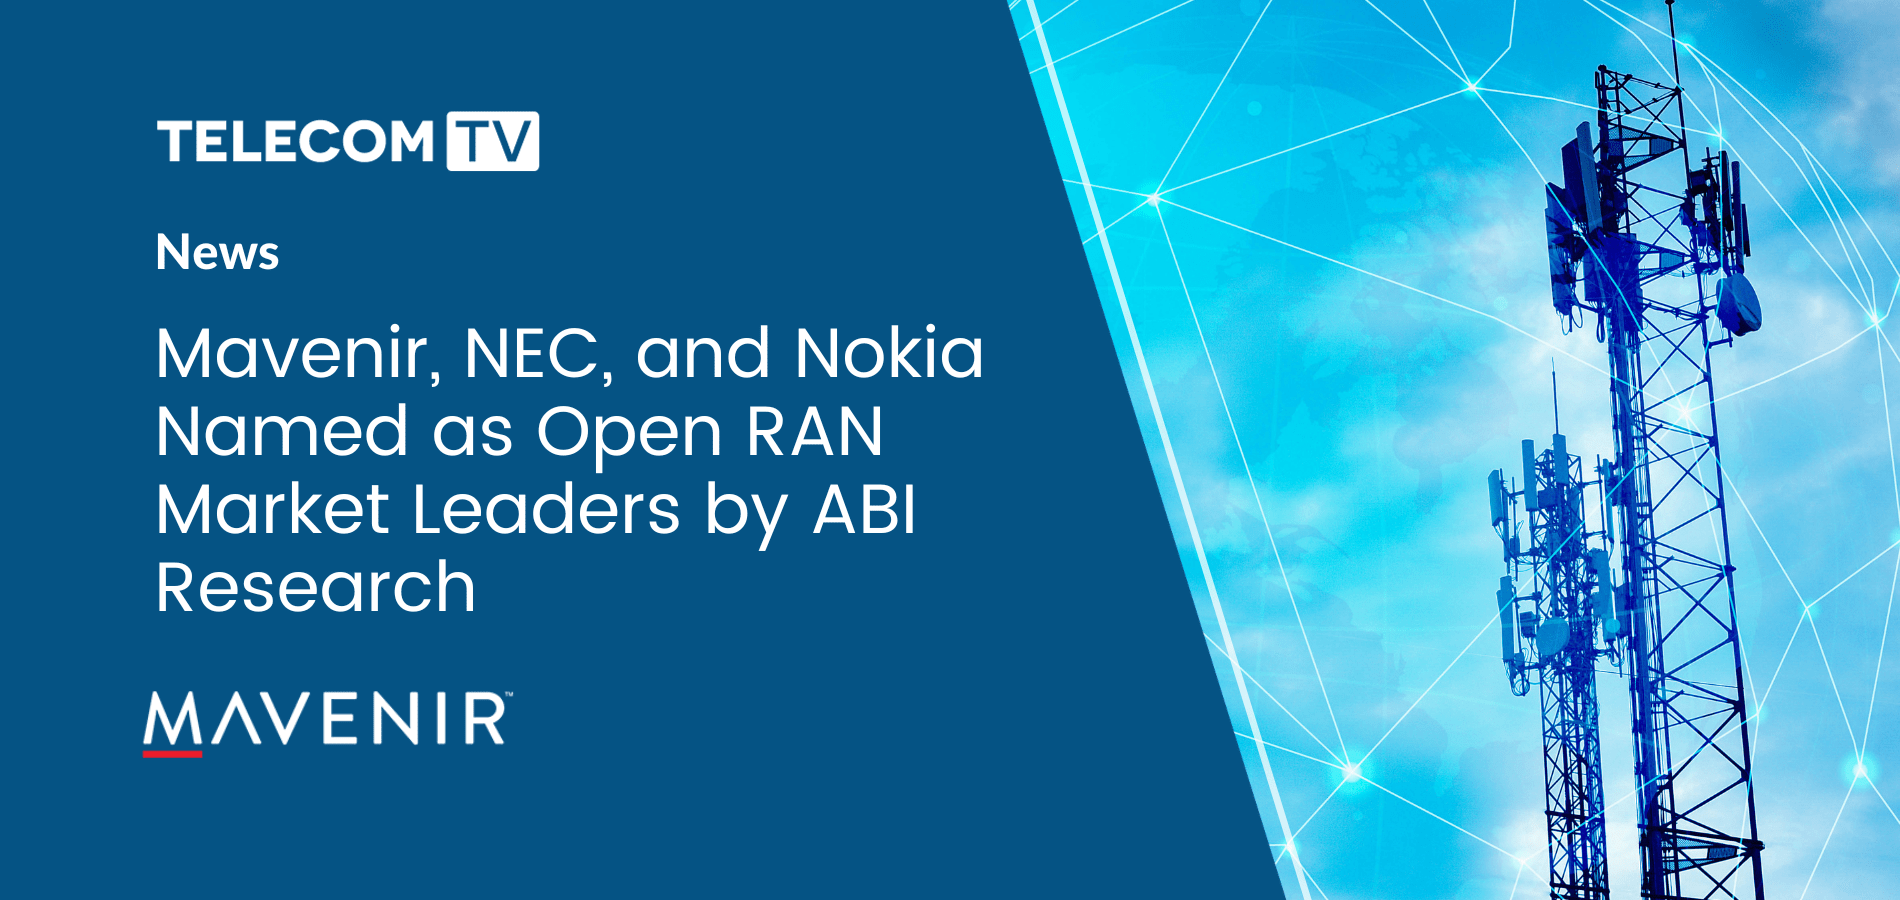 Mavenir, NEC, and Nokia Named as Open RAN Market Leaders by ABI Research